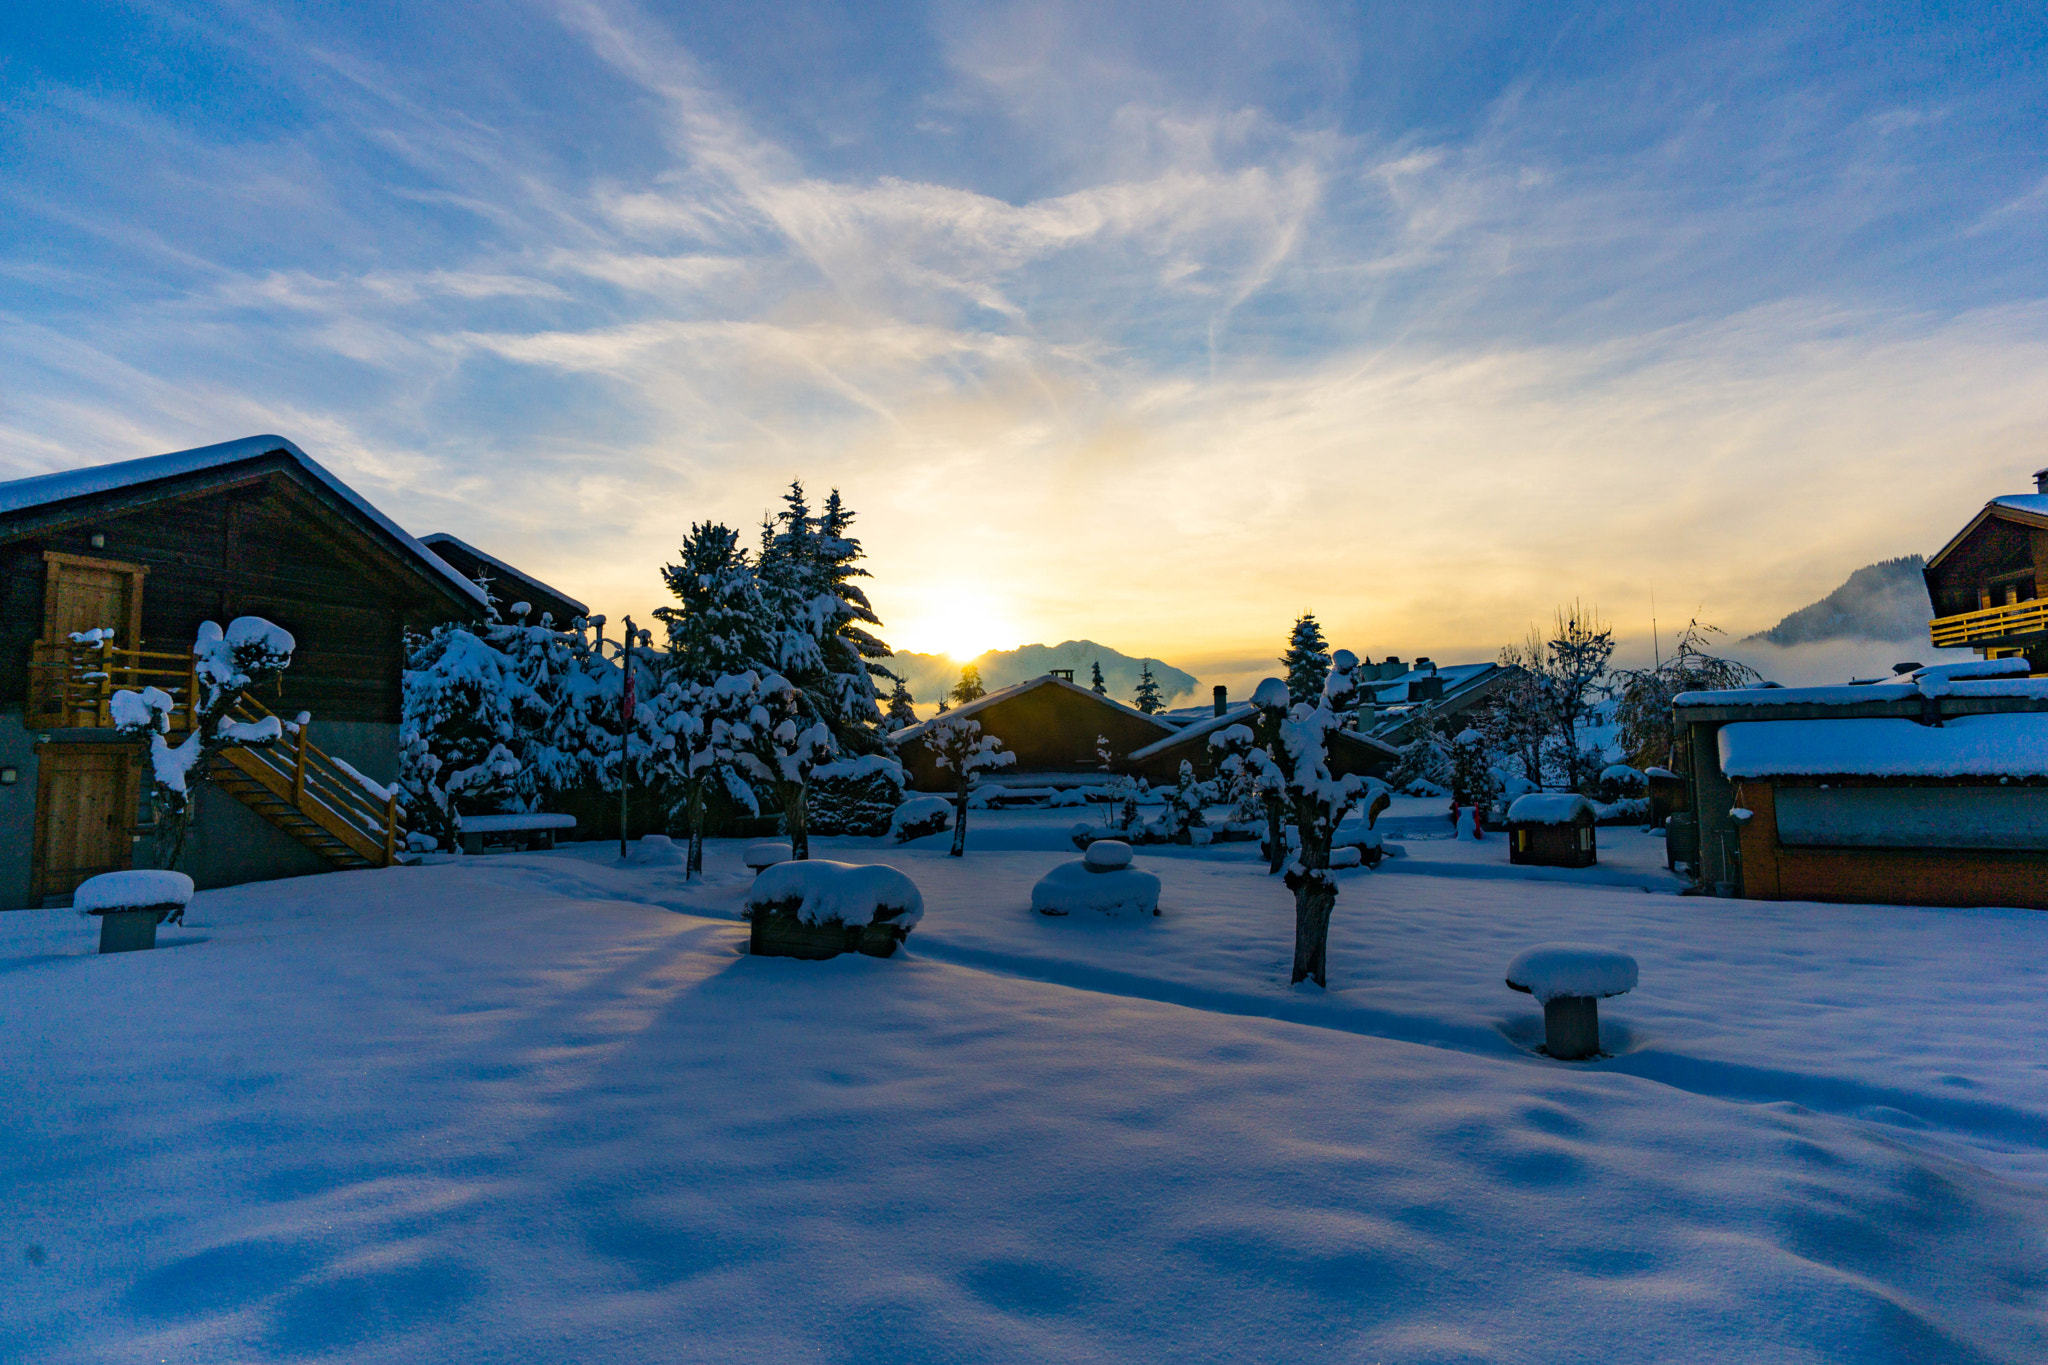 ZEISS Touit 12mm F2.8 sample photo. First snow of the season photography